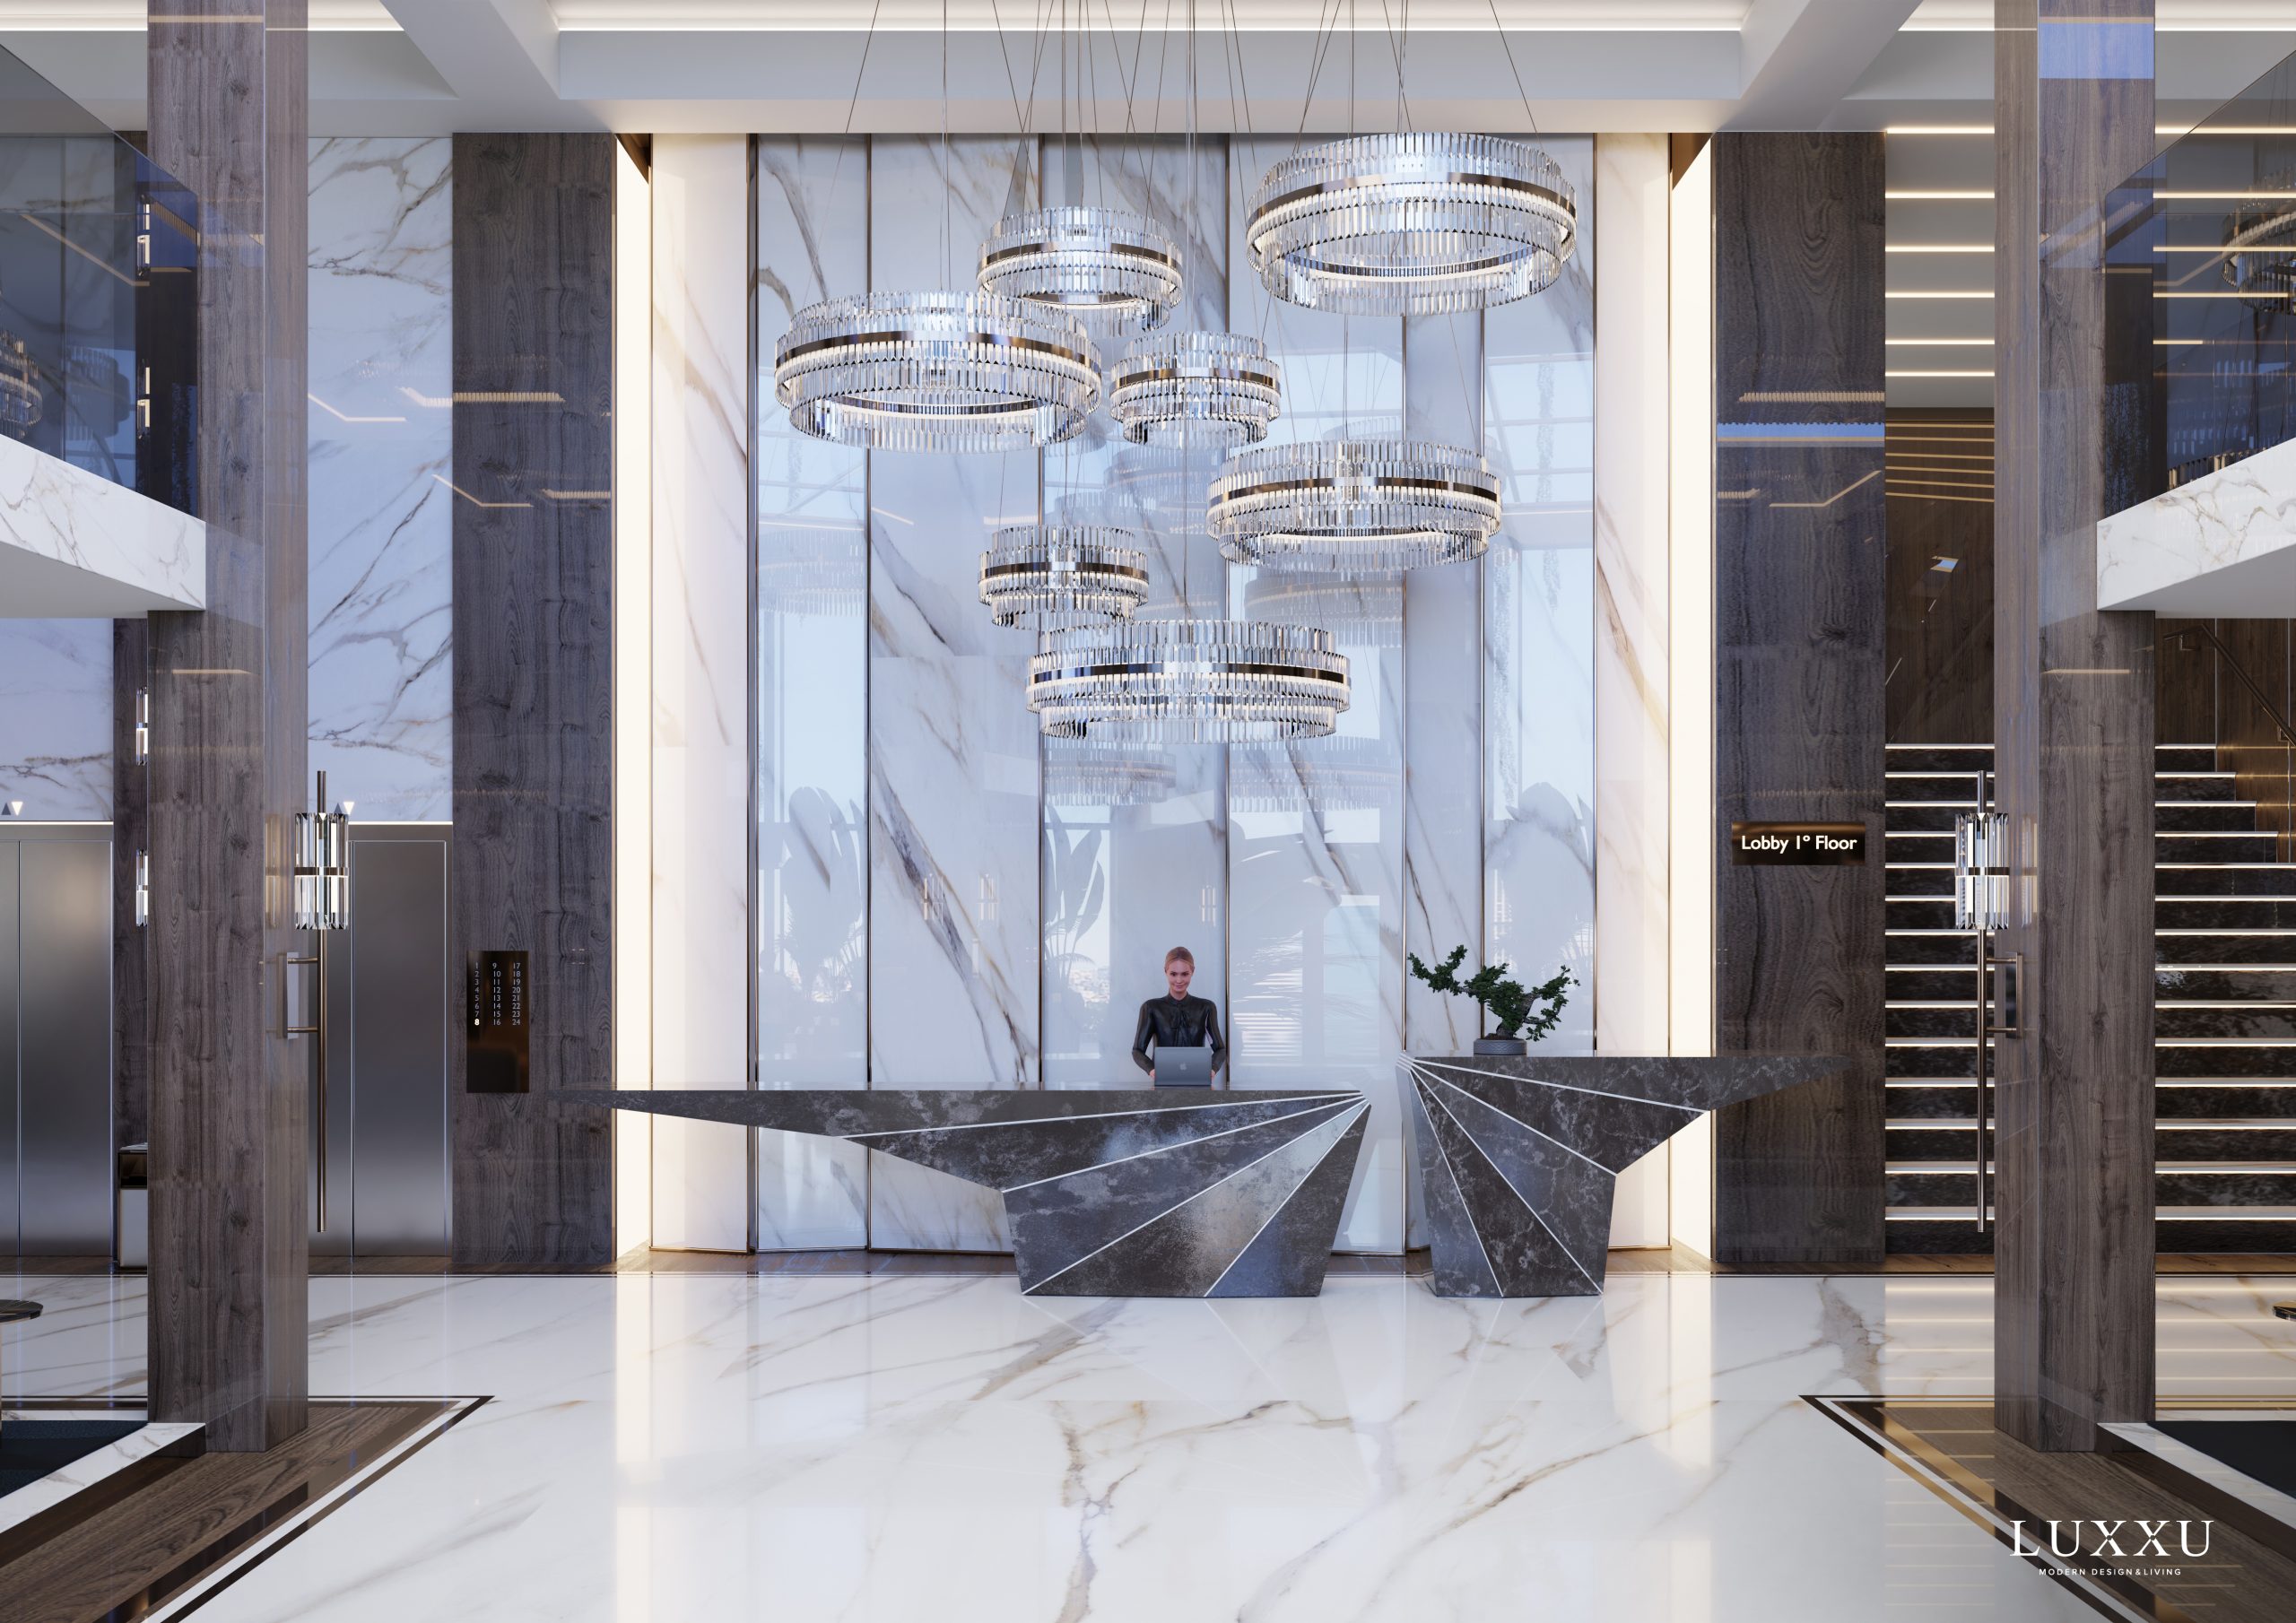 Opulent Hospitality Design with a bespoke lobby counter